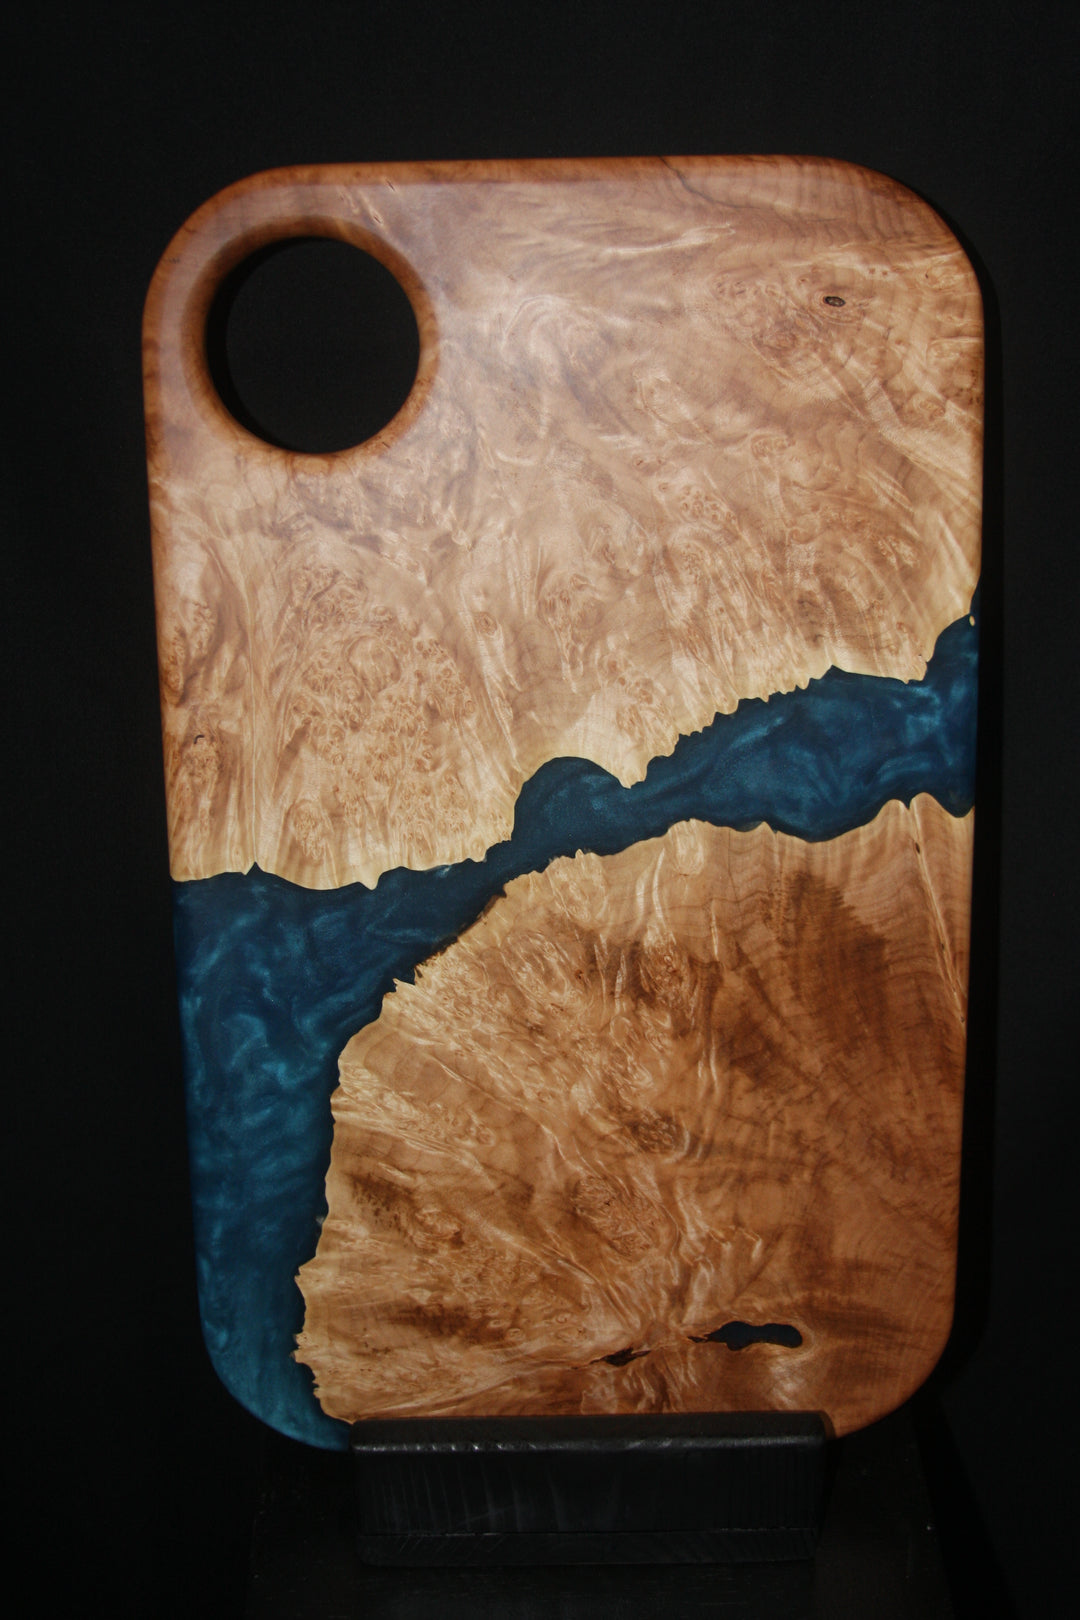 Highly figured maple burl with deep blue epoxy resin charcuterie board